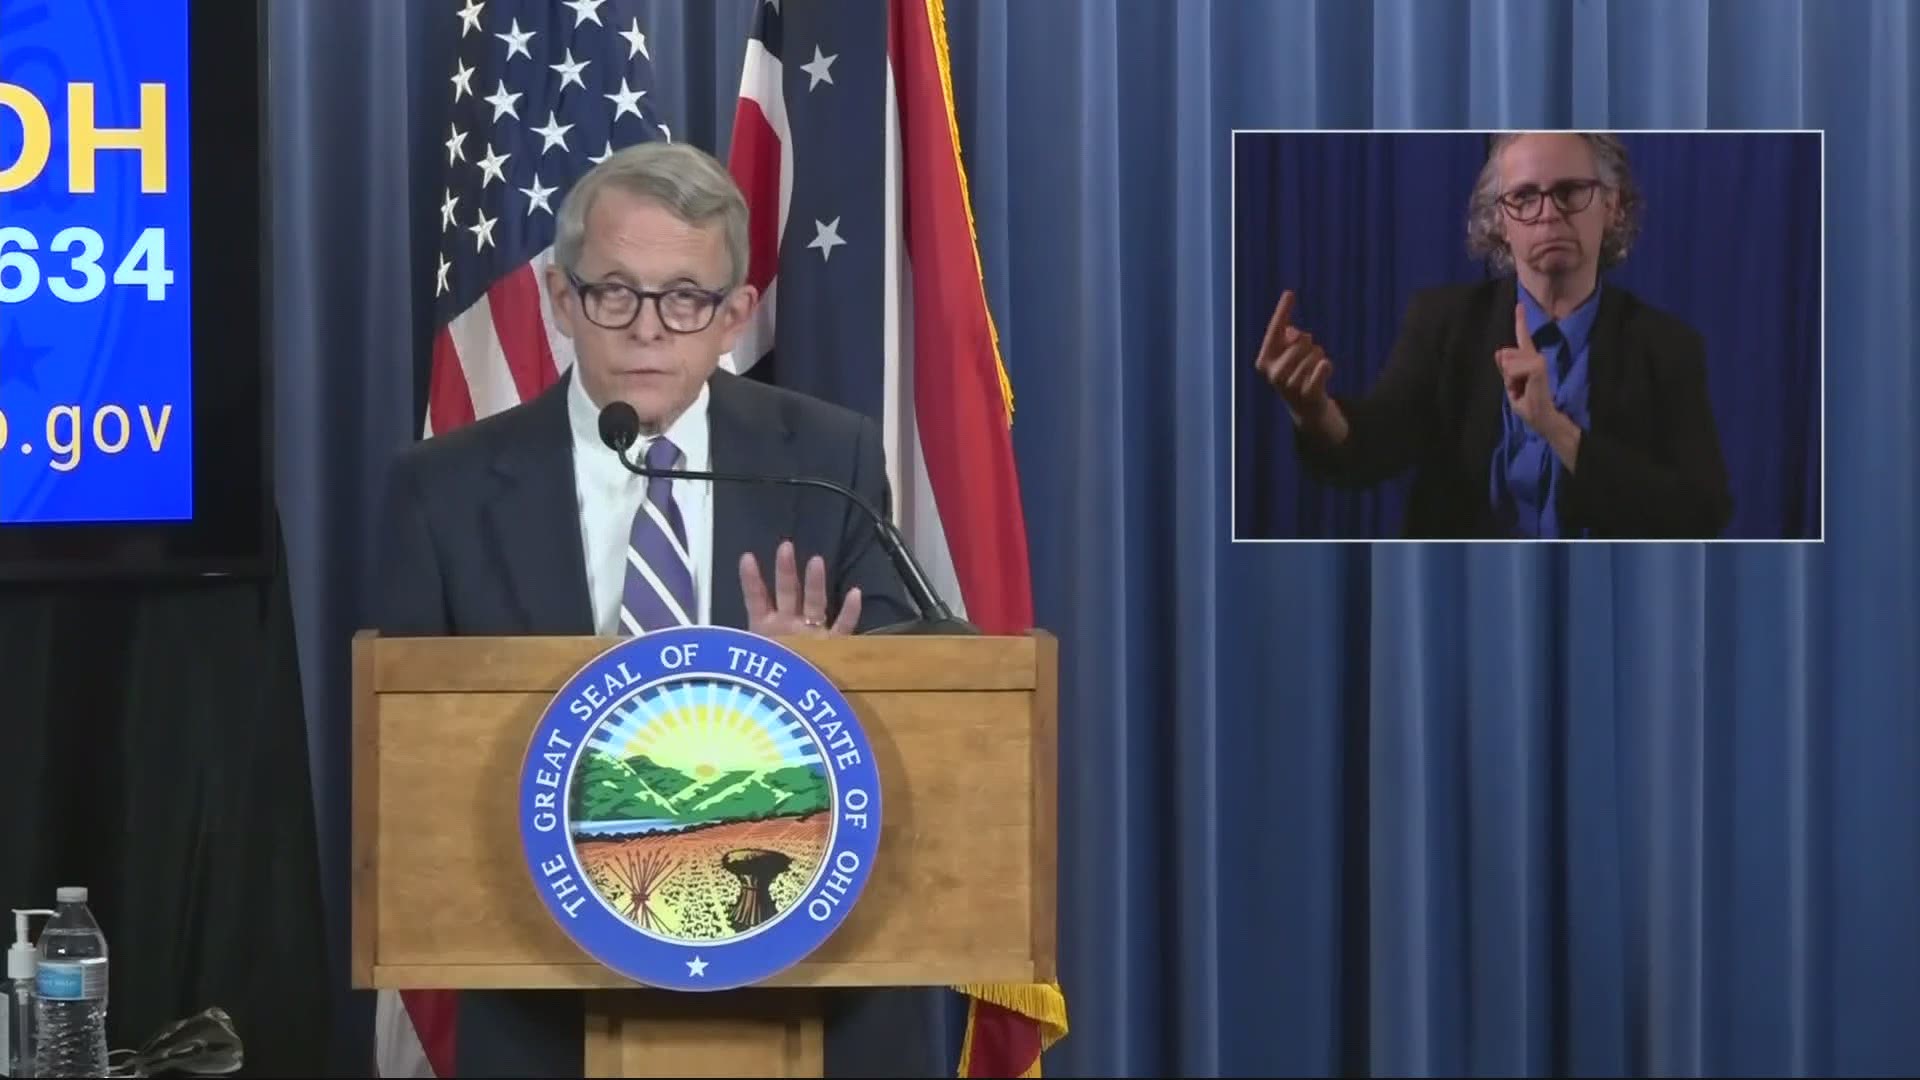 DeWine said the order will be the same as it has been but it will offer recommendations when gatherings can be done safely.